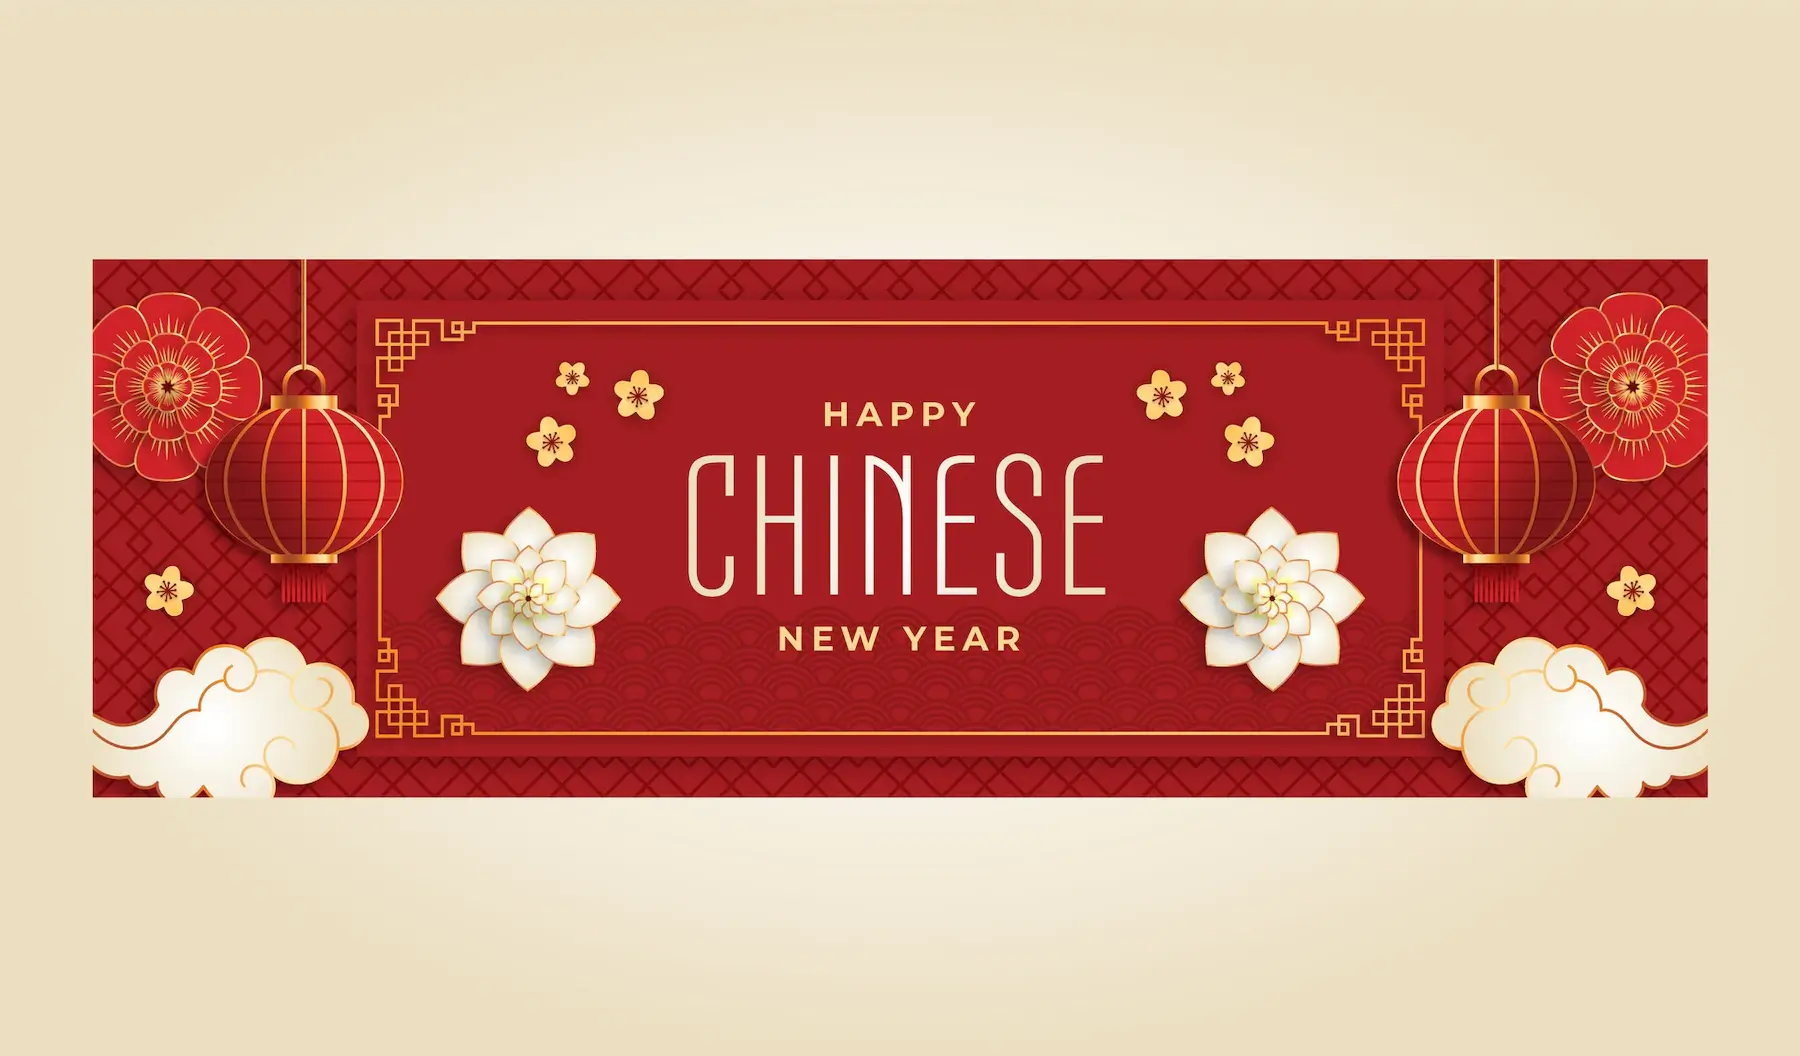 Happy New Year Messages in Chinese